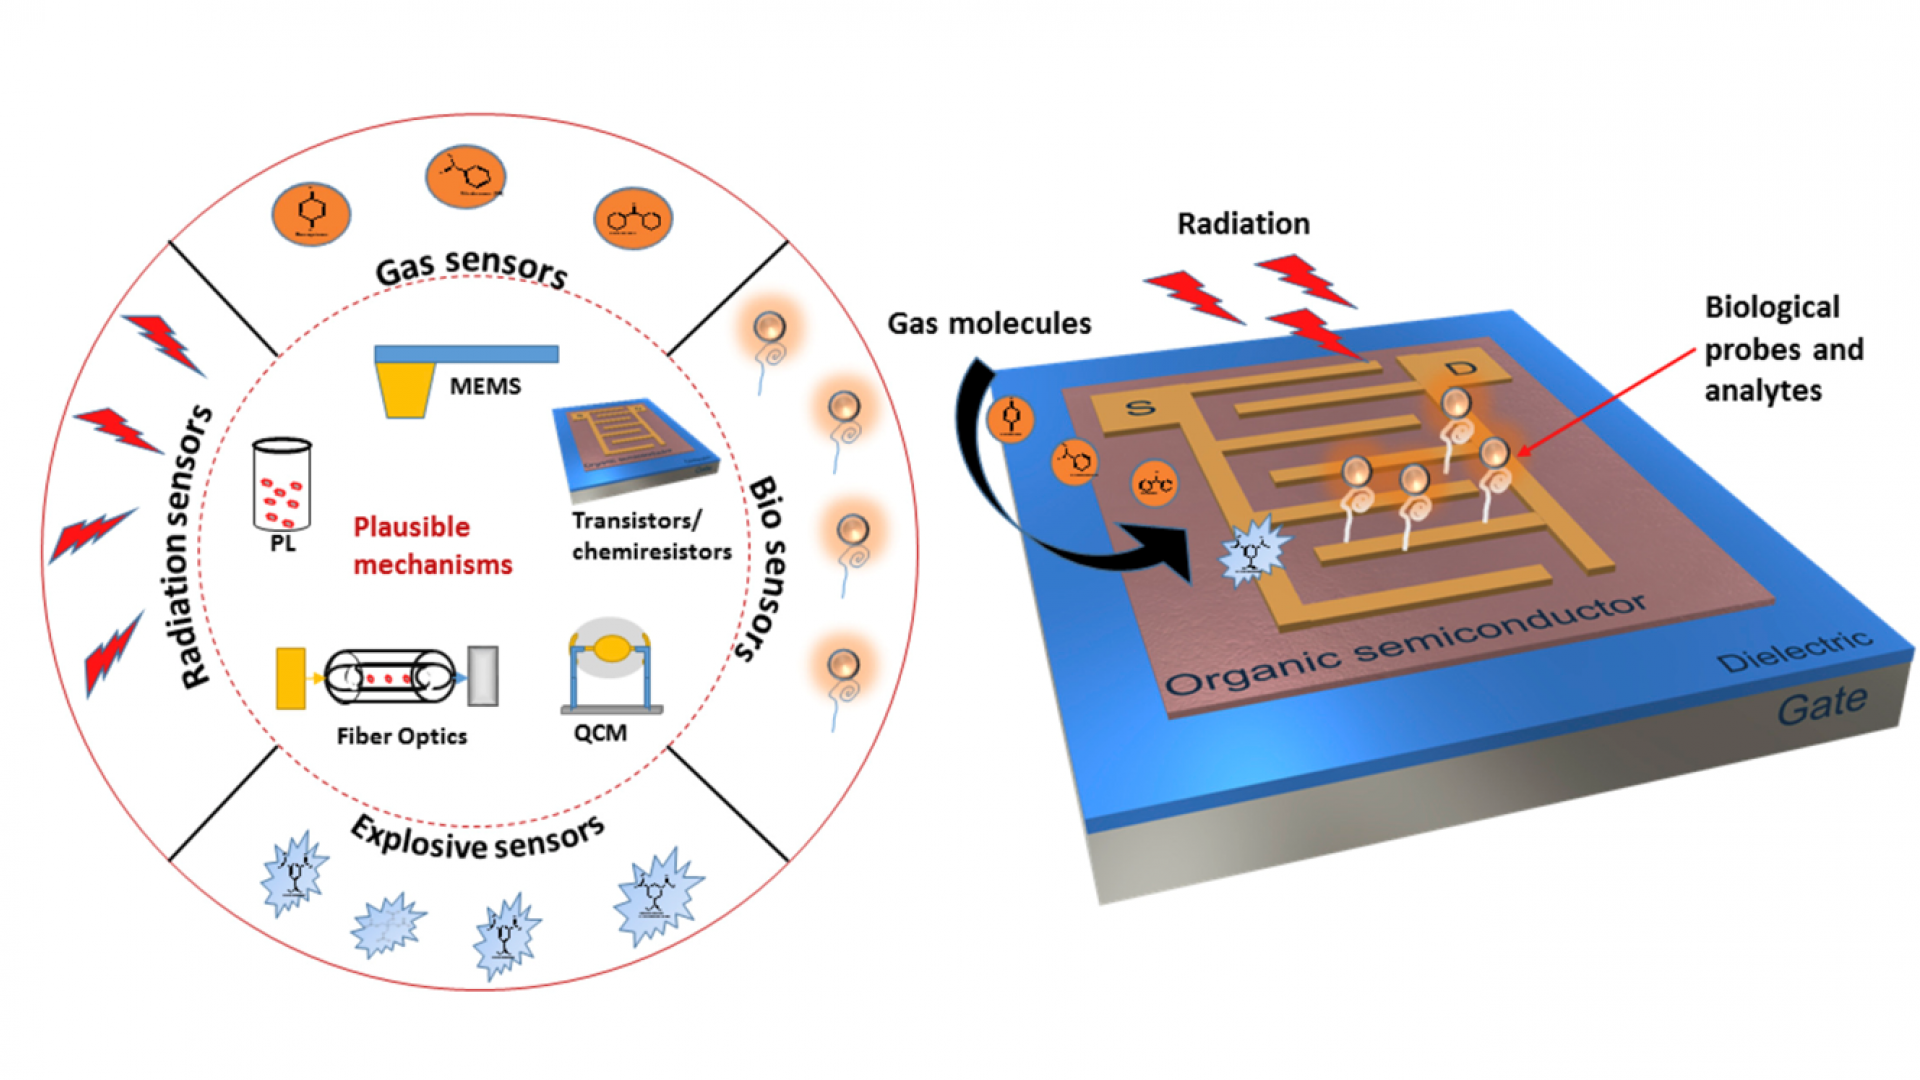 Organic field effect transistors (OFETs) in environmental sensing and health monitoring: A review